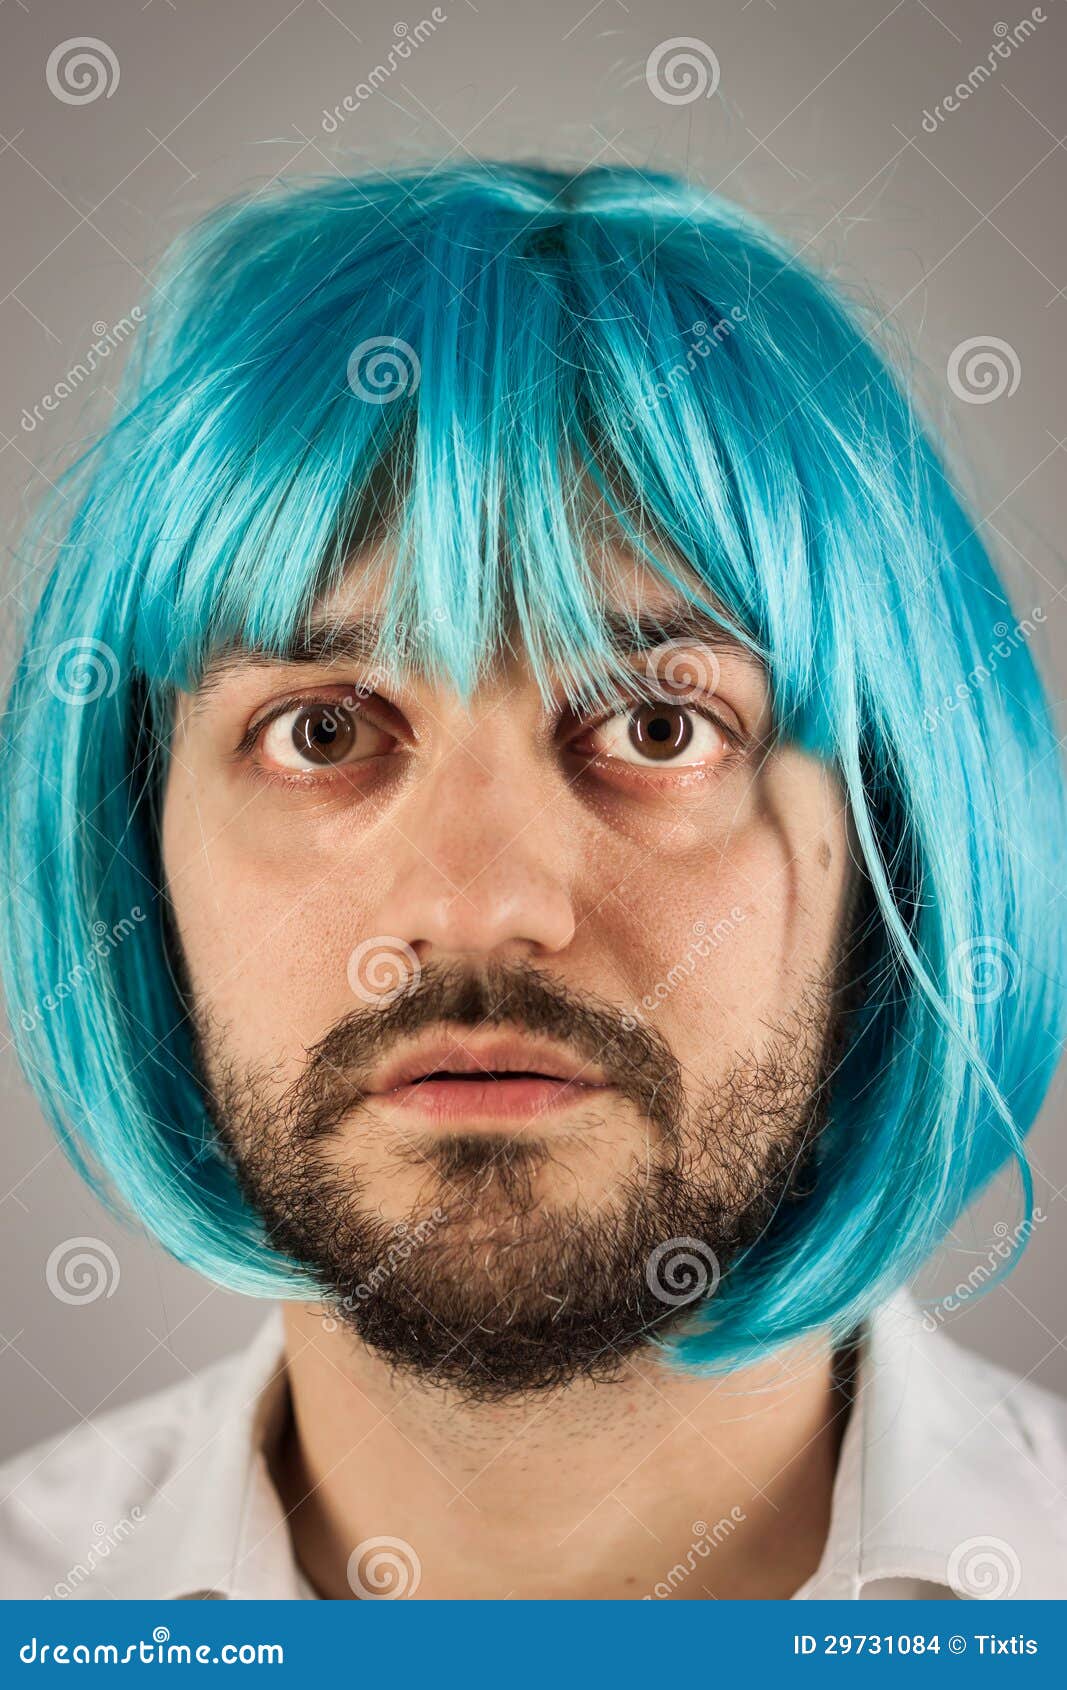 Funny Bearded Man With Wig Stock Images - Image: 29731084